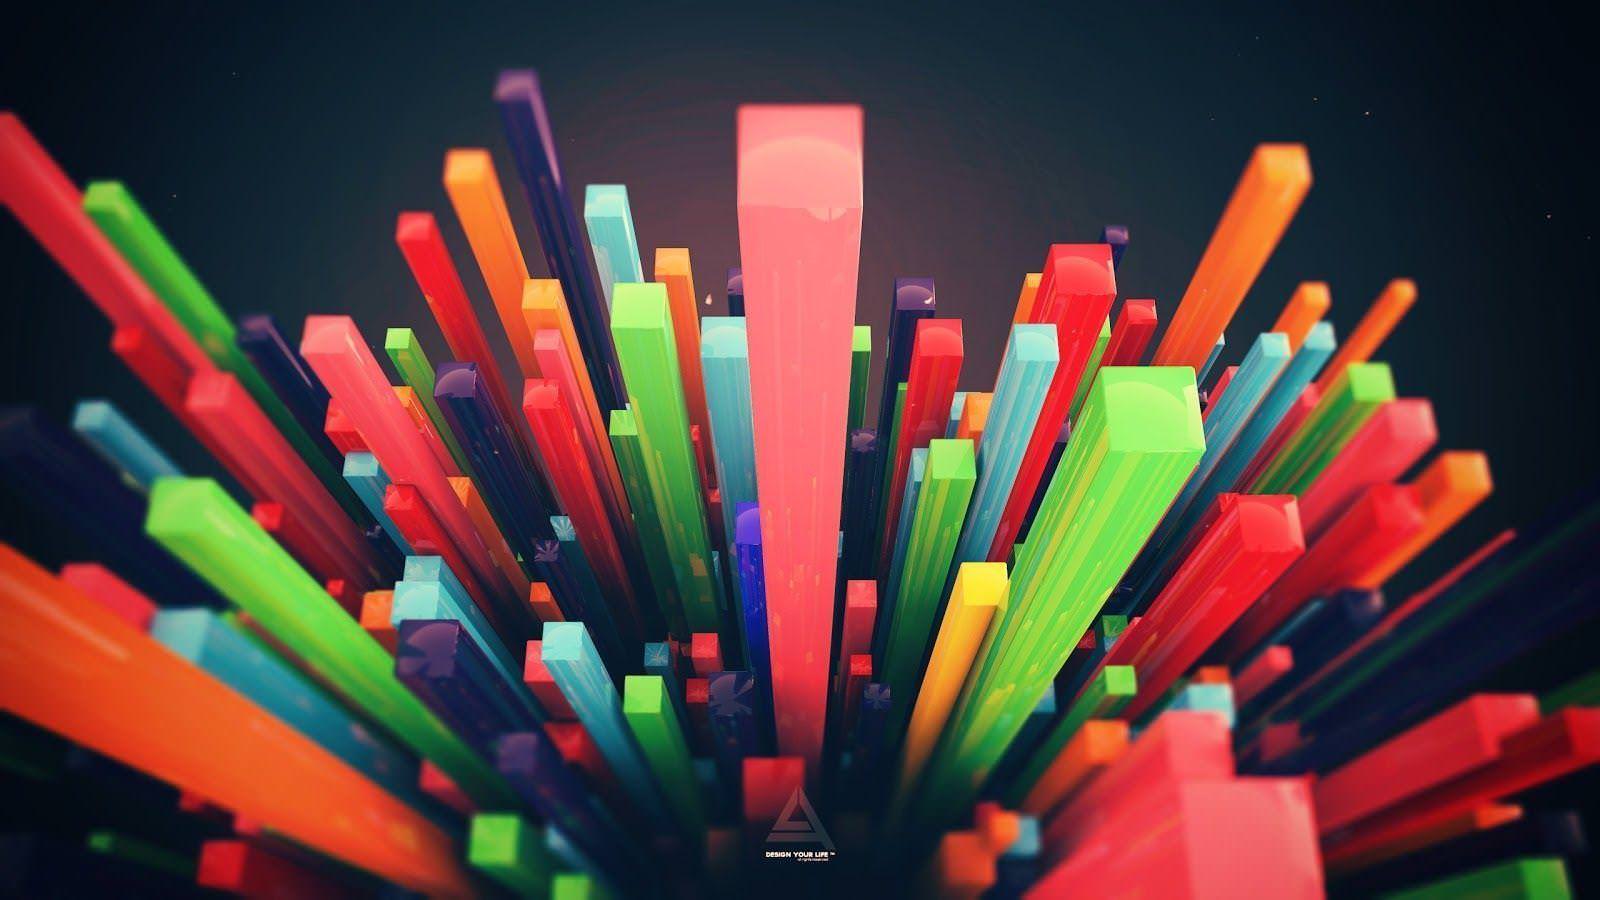 1080p wallpapers,colorfulness,drinking straw,office supplies,pencil,writing implement